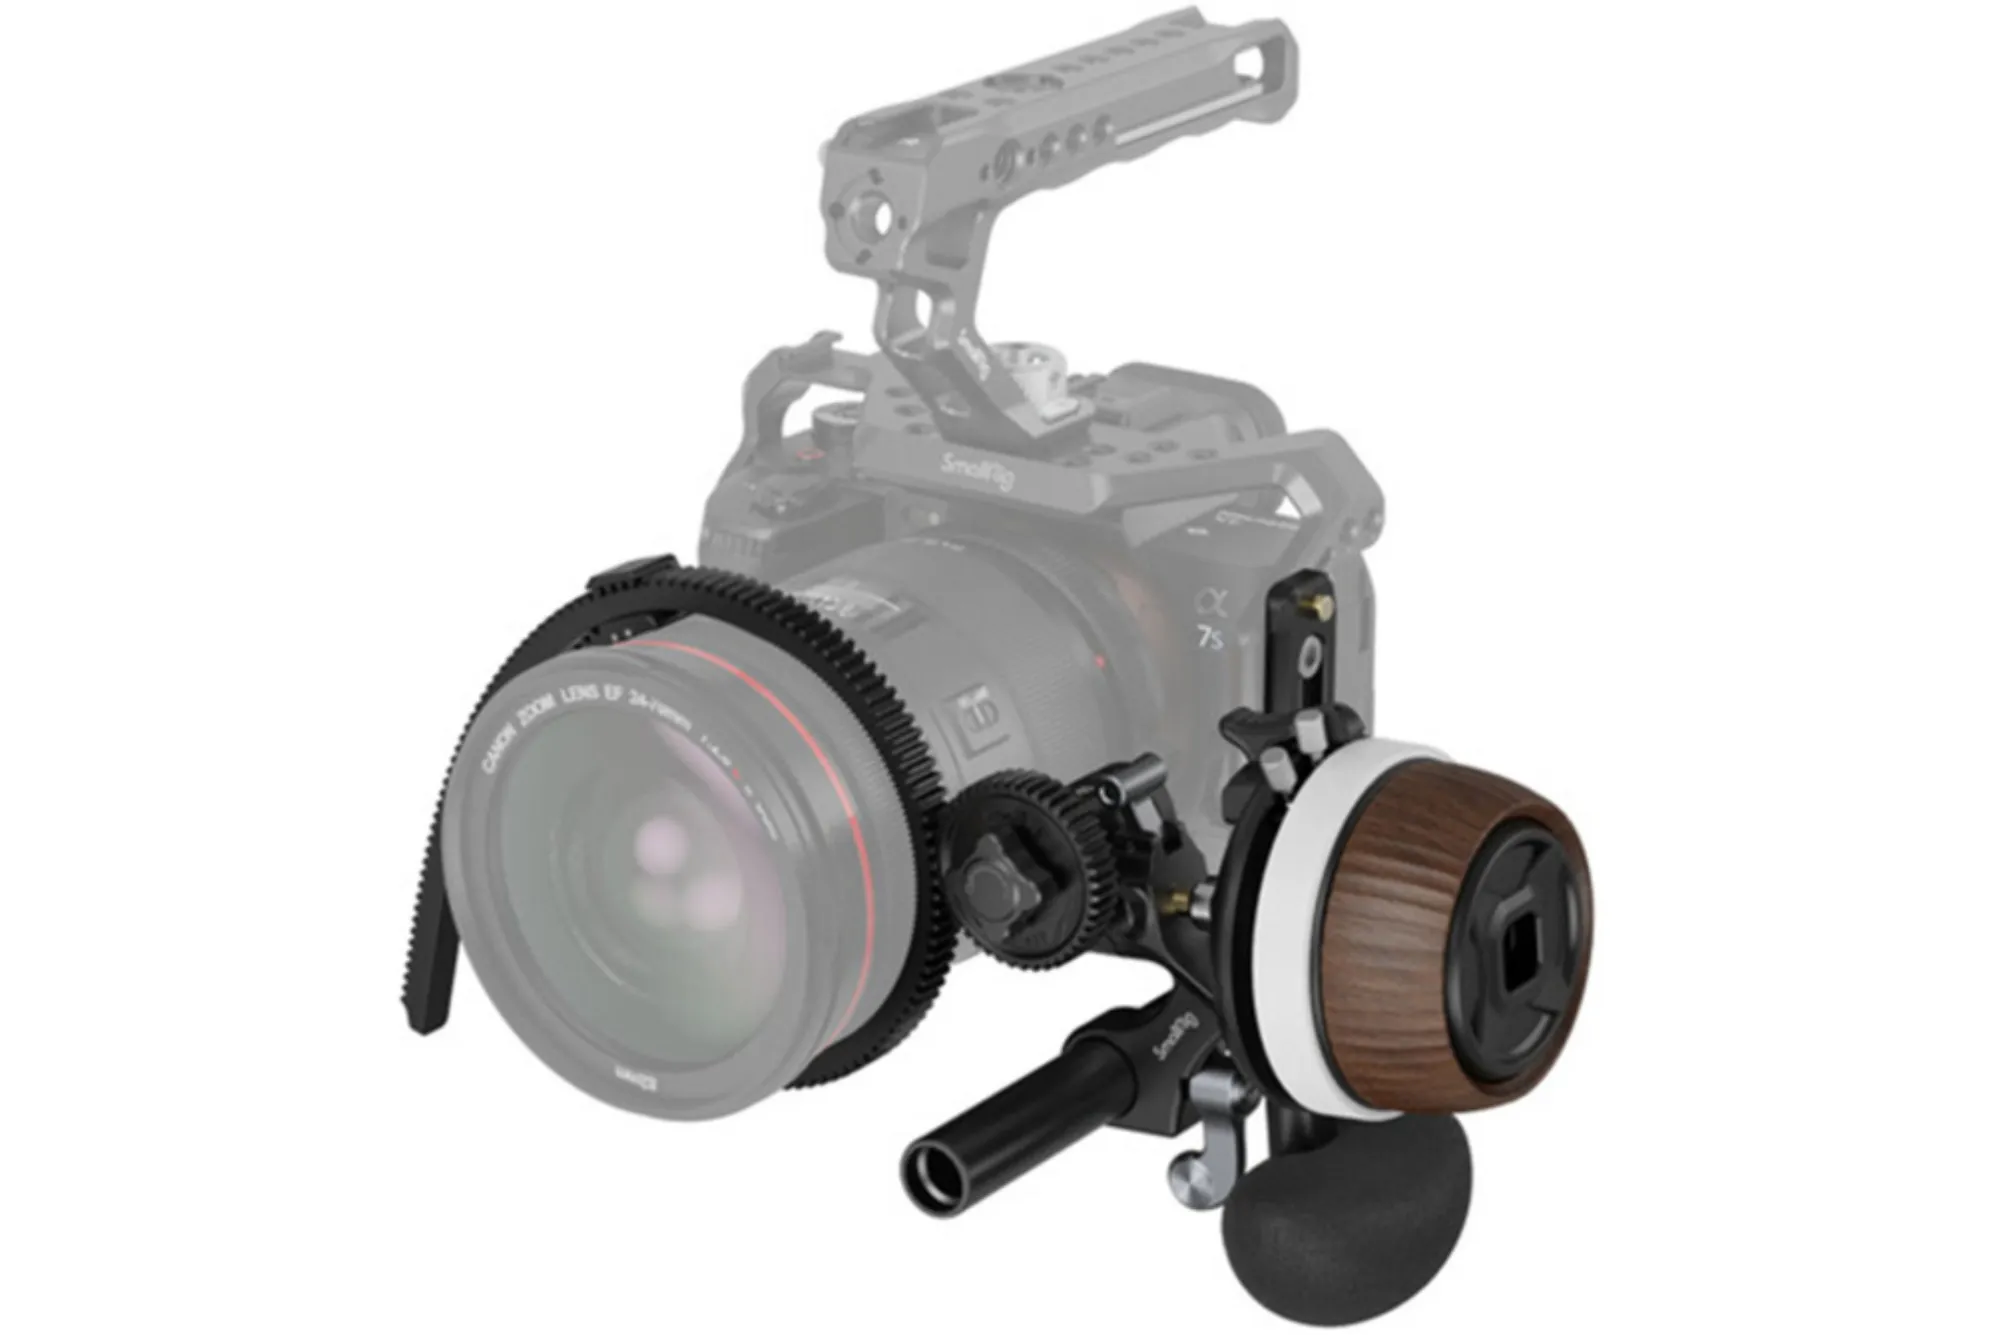 Enhance Your Filmmaking with the SmallRig Follow Focus System and Camera Cages